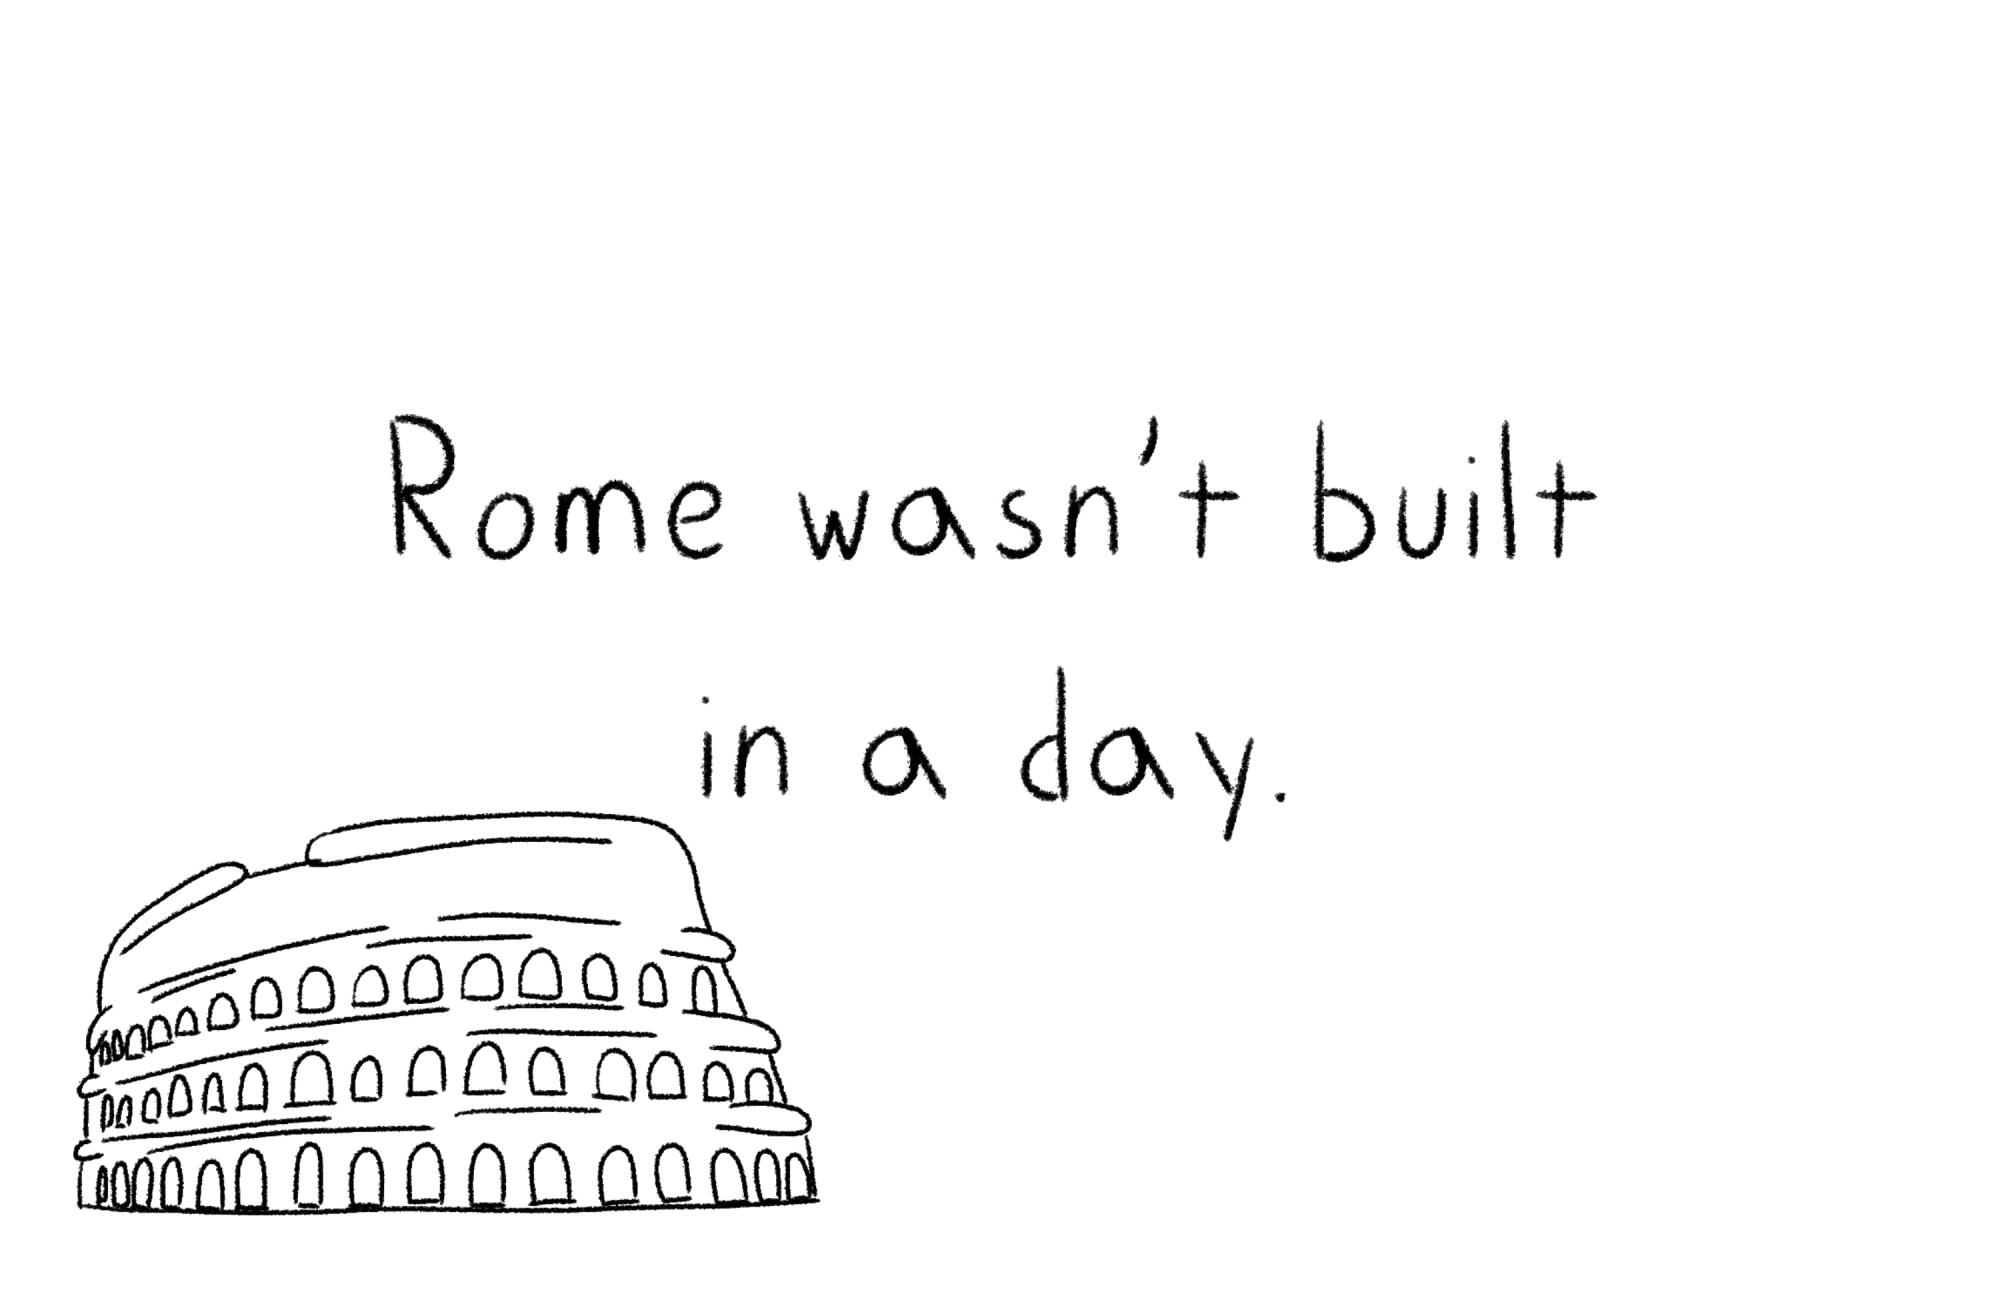 An illustration of the Colosseum with the words "Rome wasn't built in a day."